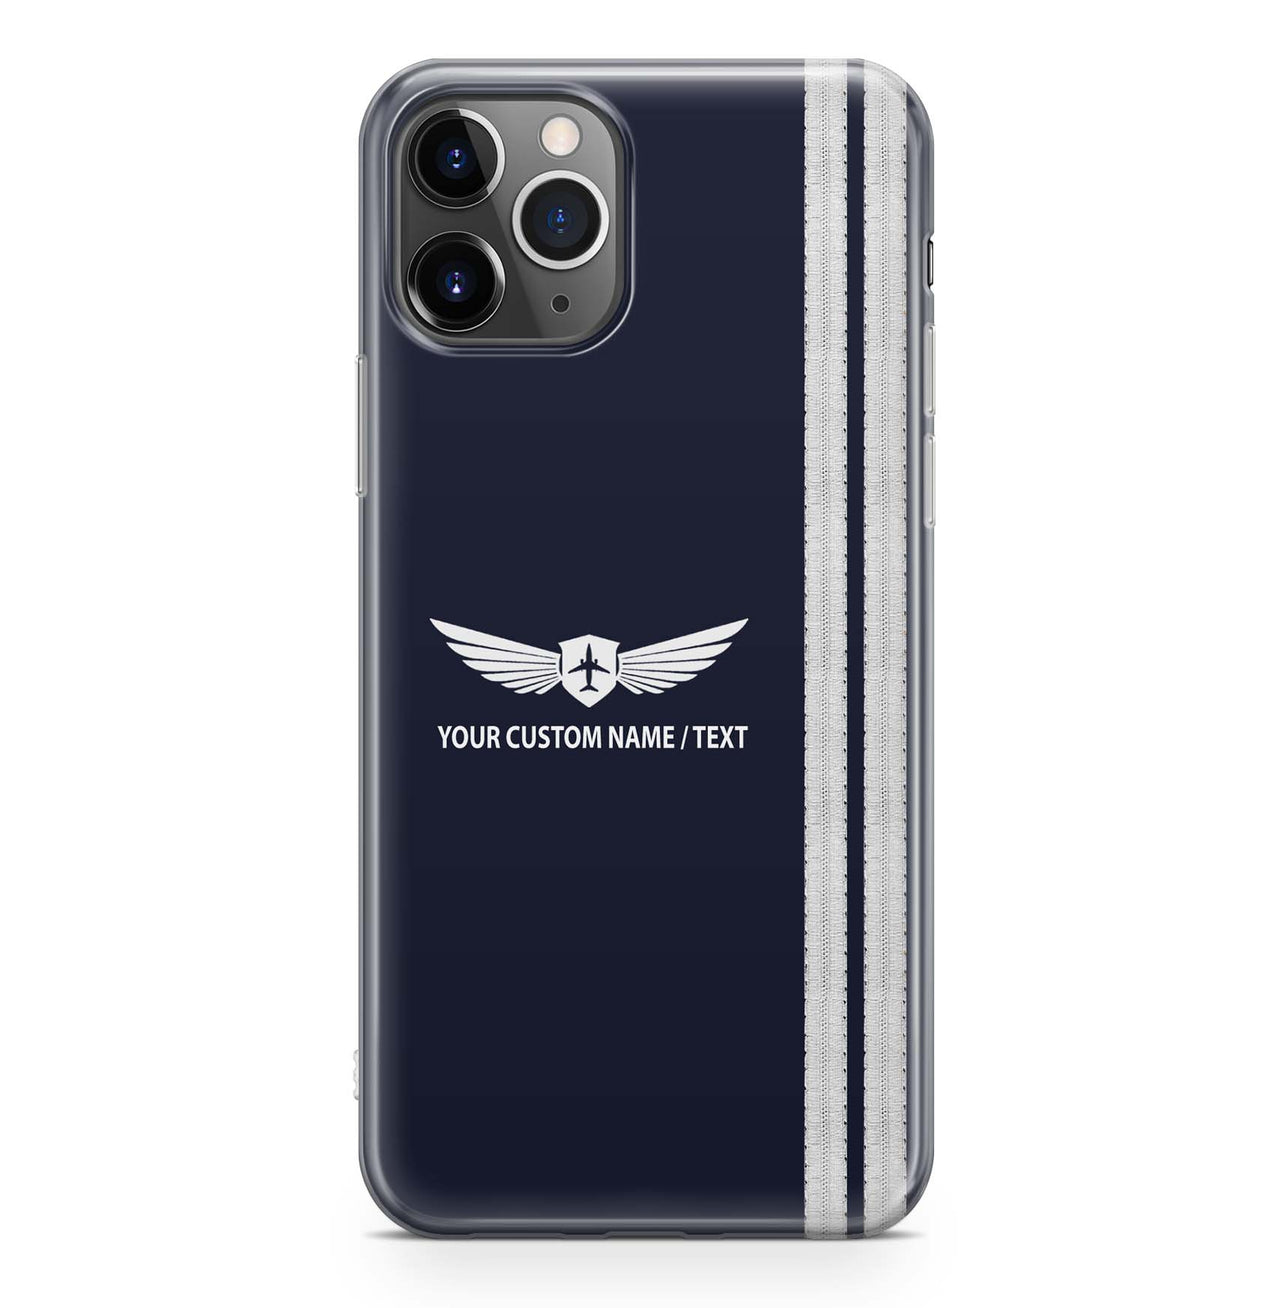 Custom Name + Special "SILVER" Epualettes (4,3,2 Lines) iPhone Cases